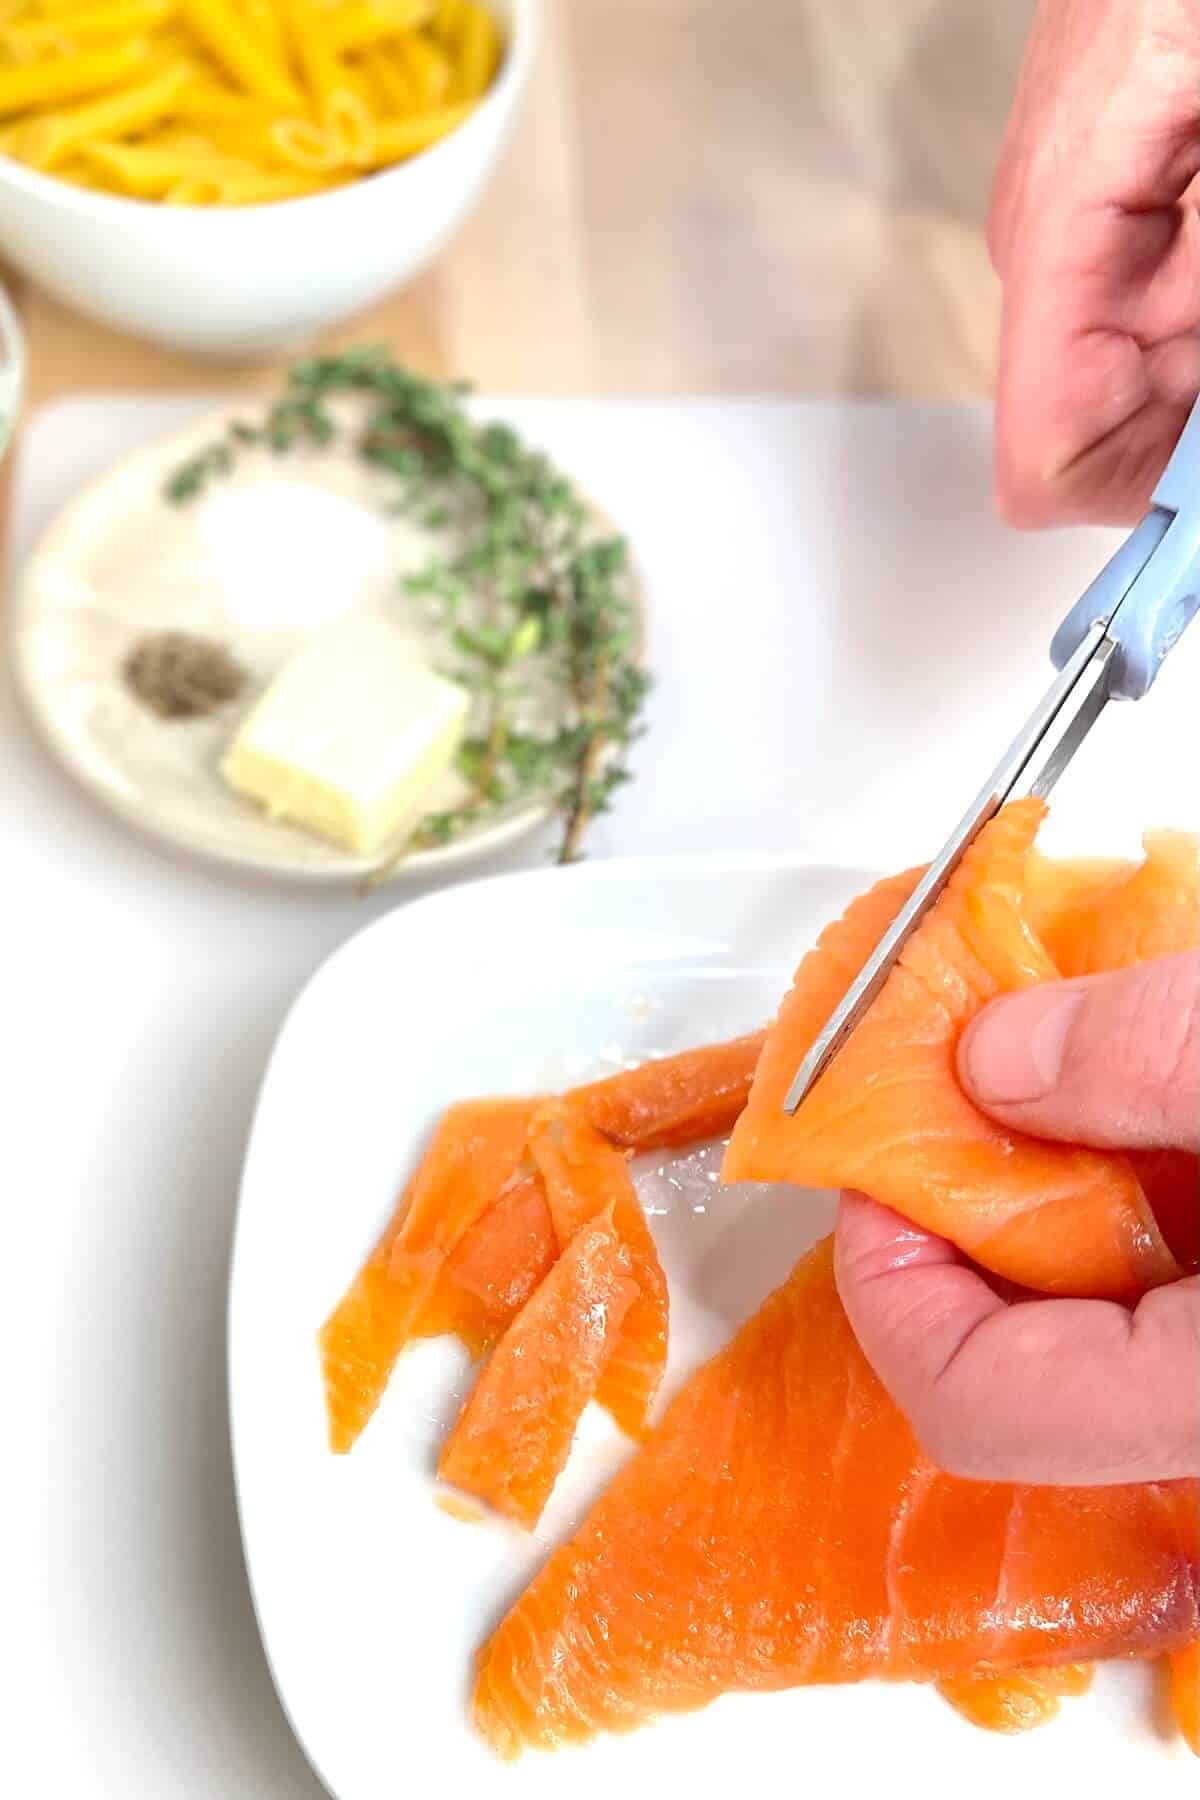 Use kitchen scissors to cut the salmon into ¼” to ½” strips.